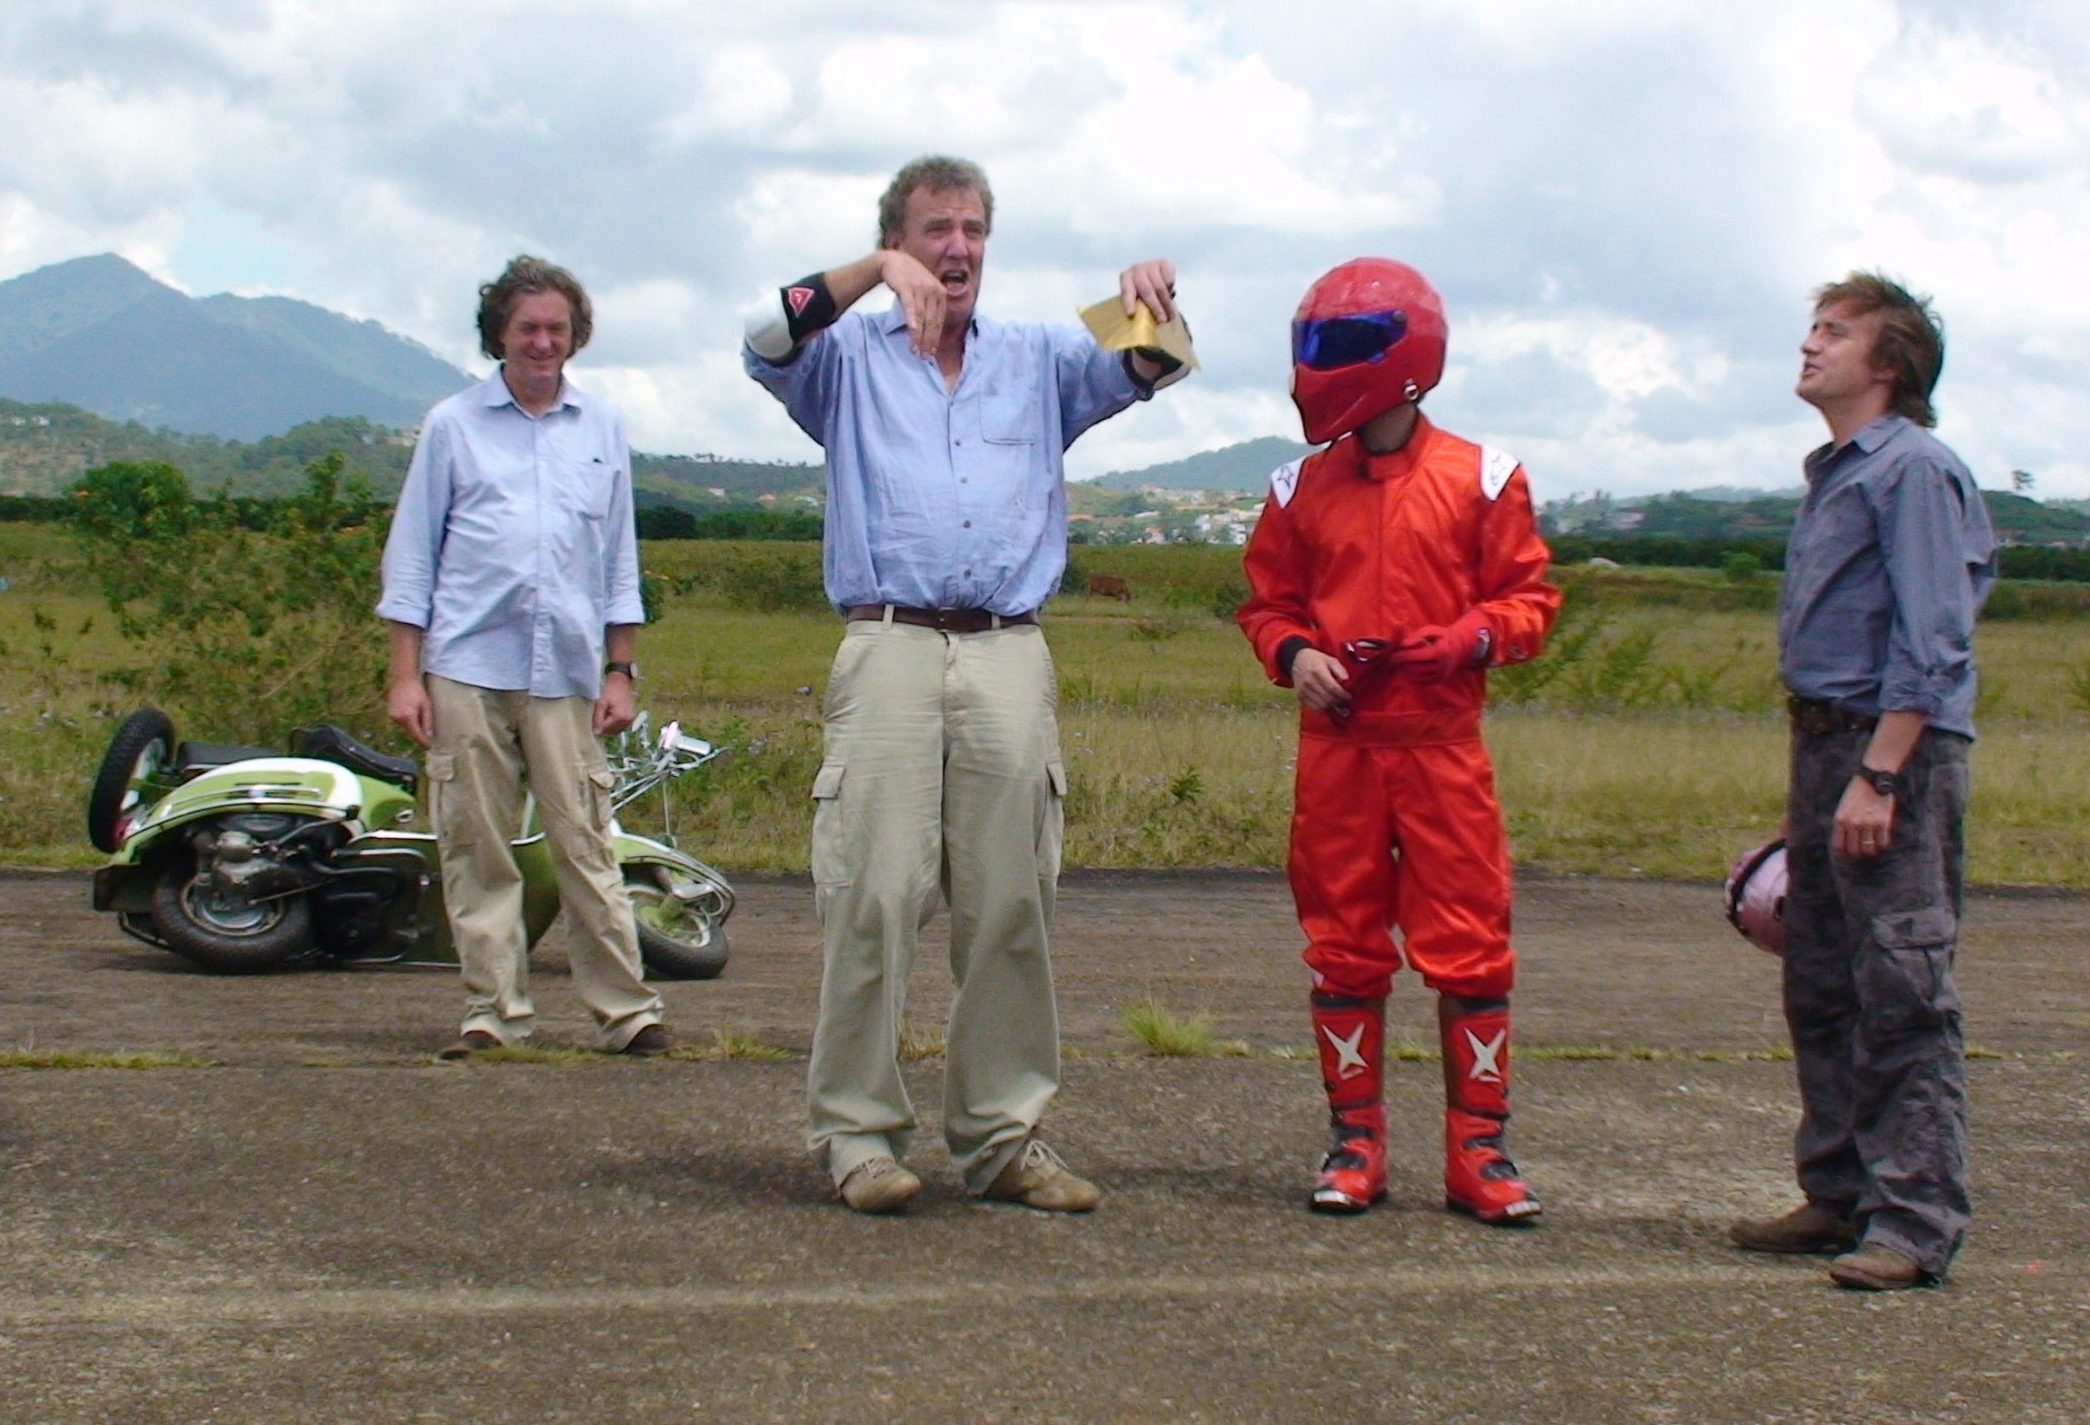 The Top Gear presenters with the Vietnamese Stig